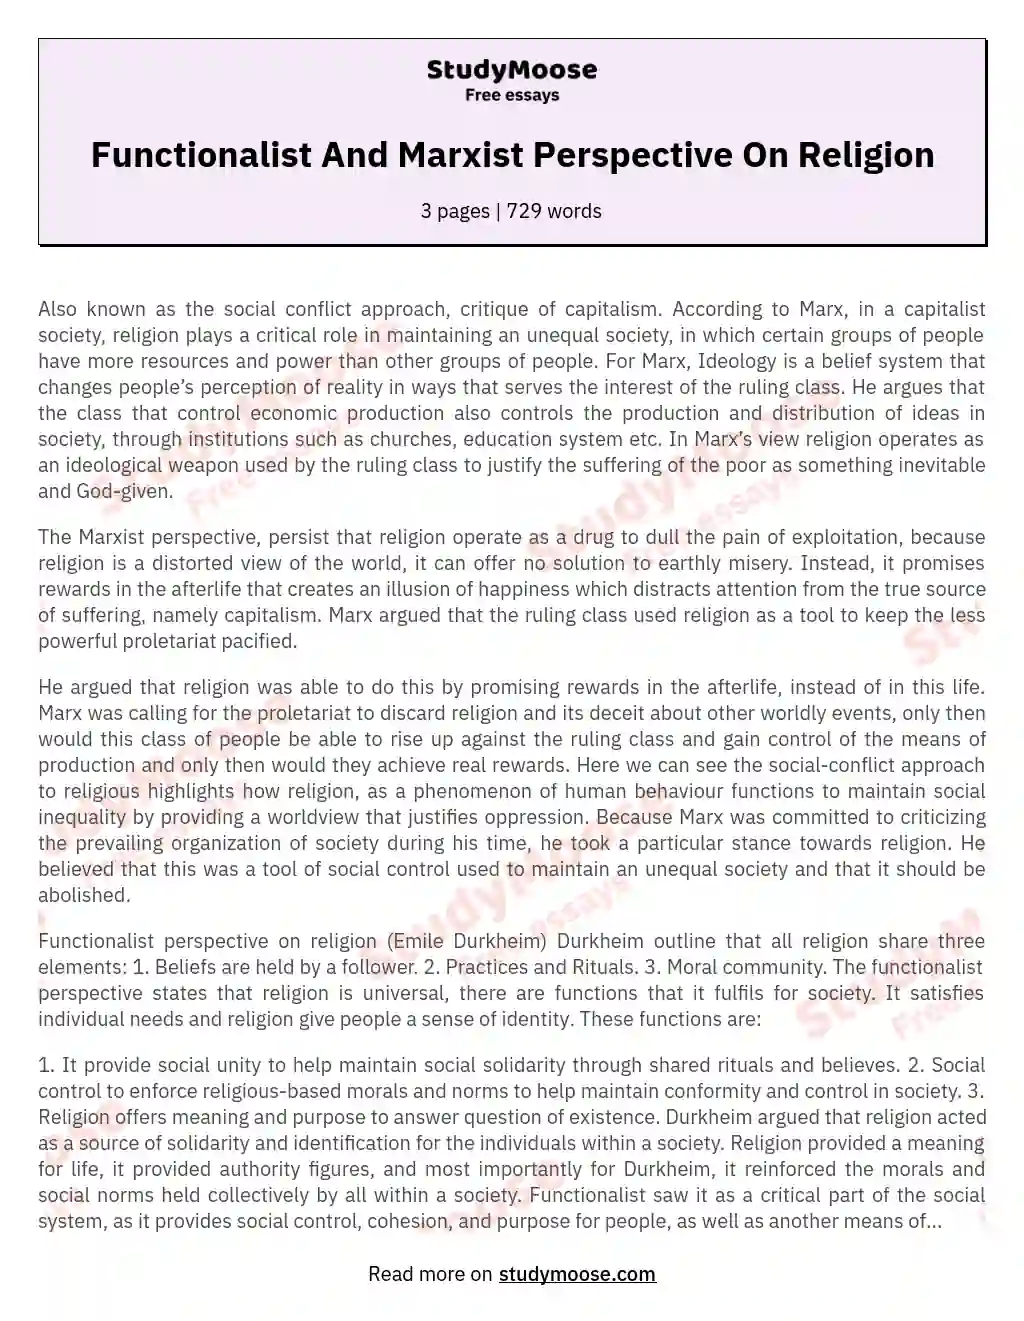 write an essay on rationalistic religion